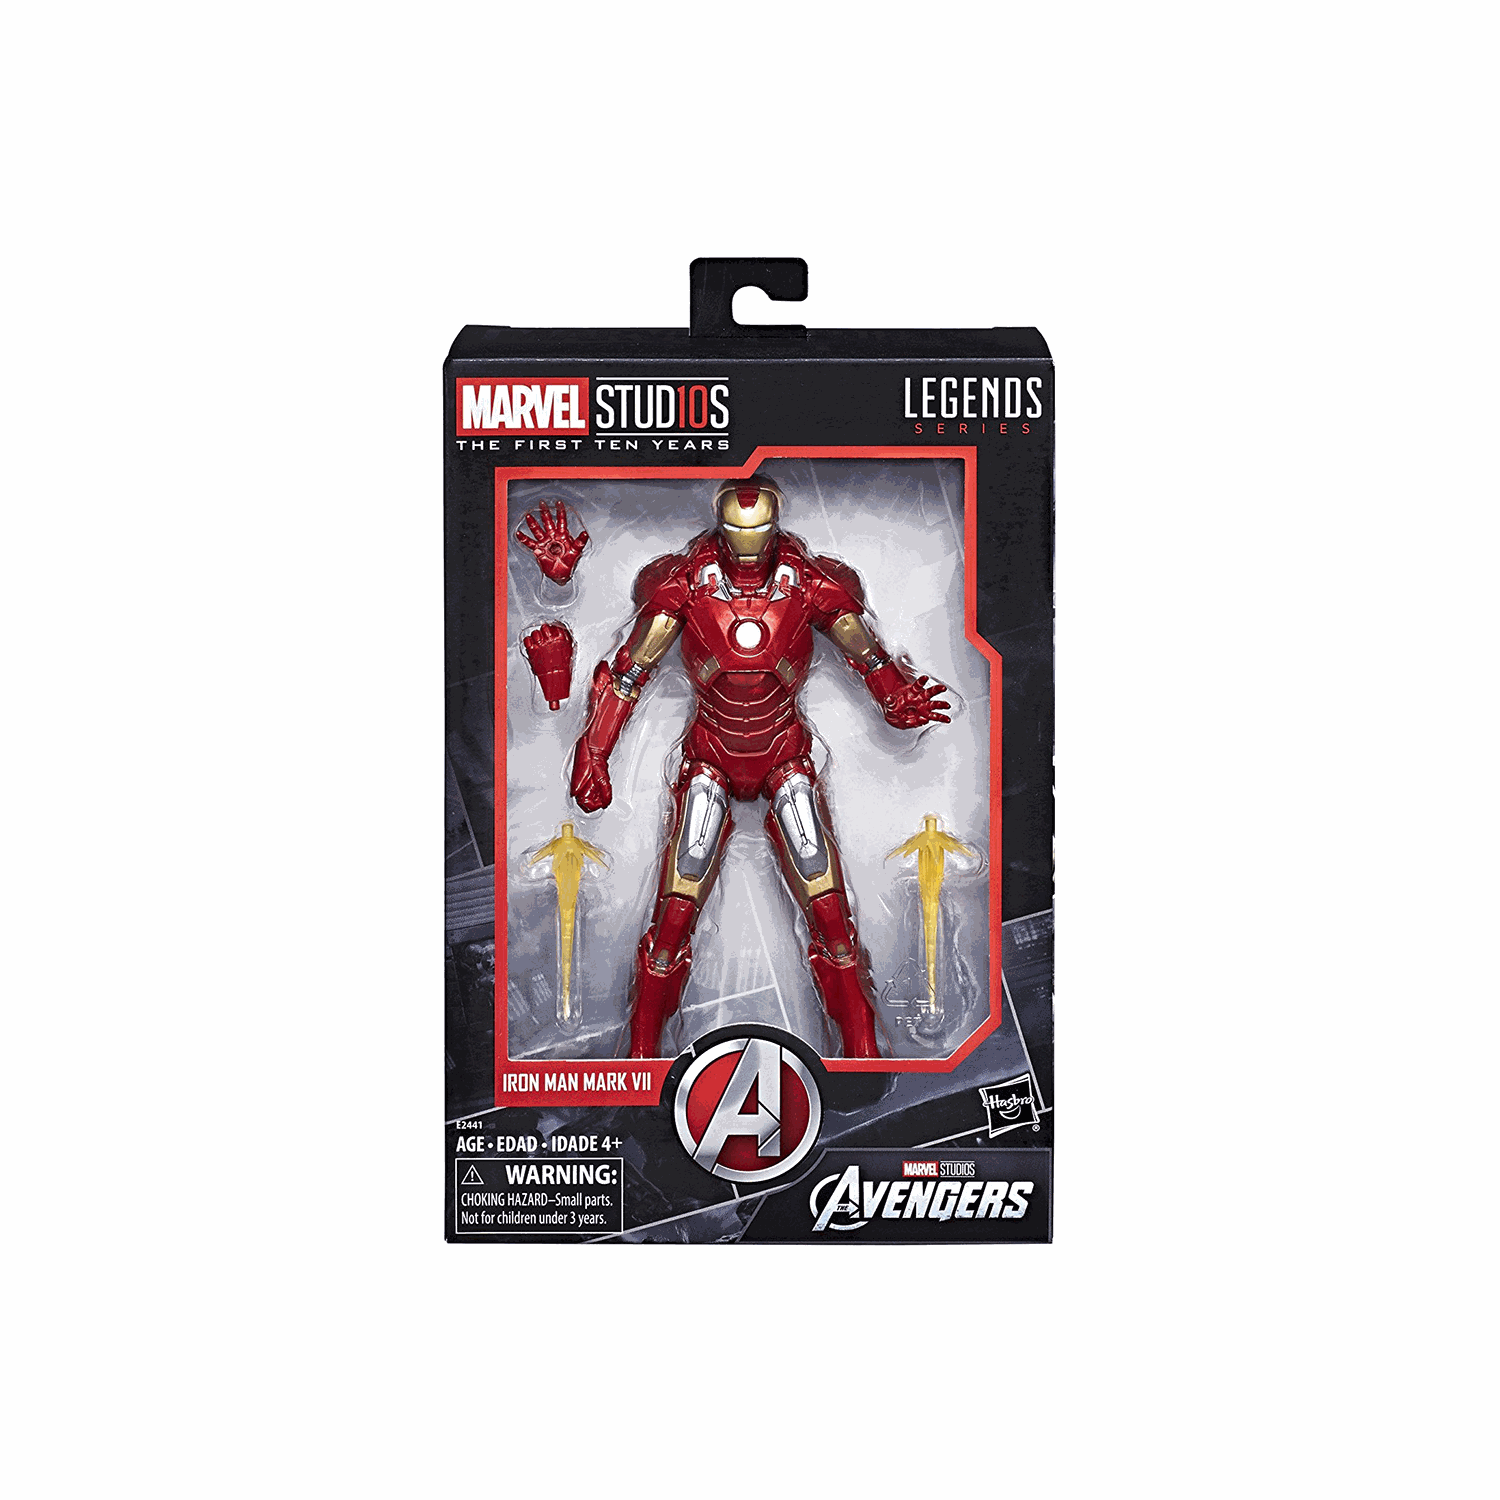 Marvel Legends Studios 6 Inch Action Figure 10th Anniversary Series - Iron Man Mark VII #2 (Non Mint Packaging)